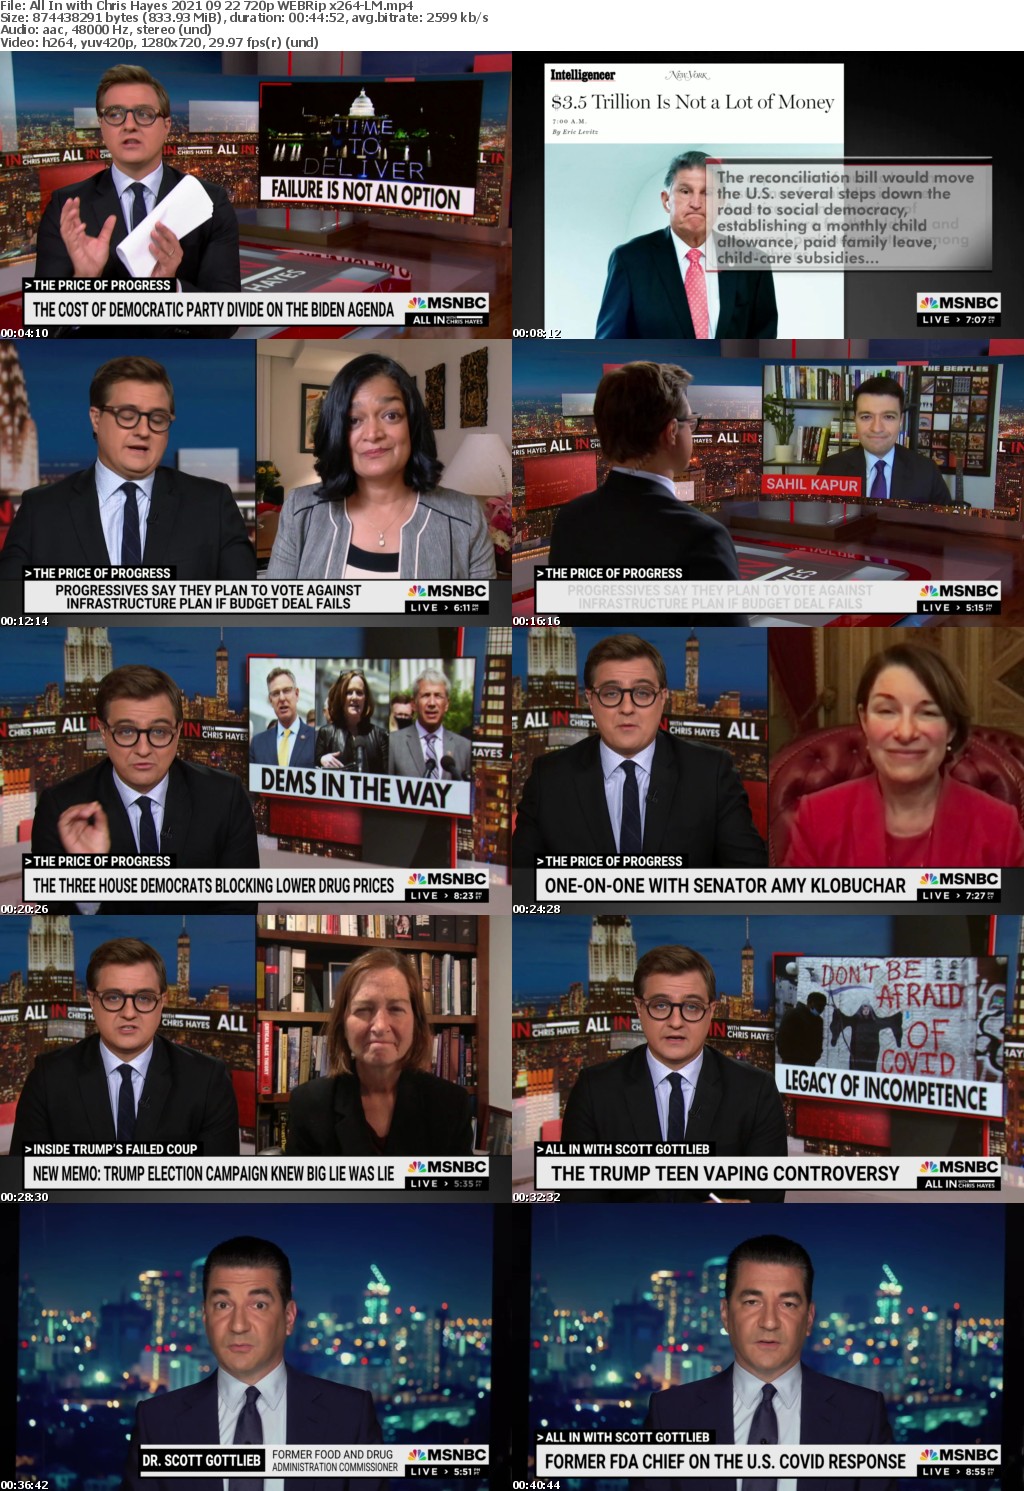 All In with Chris Hayes 2021 09 22 720p WEBRip x264-LM